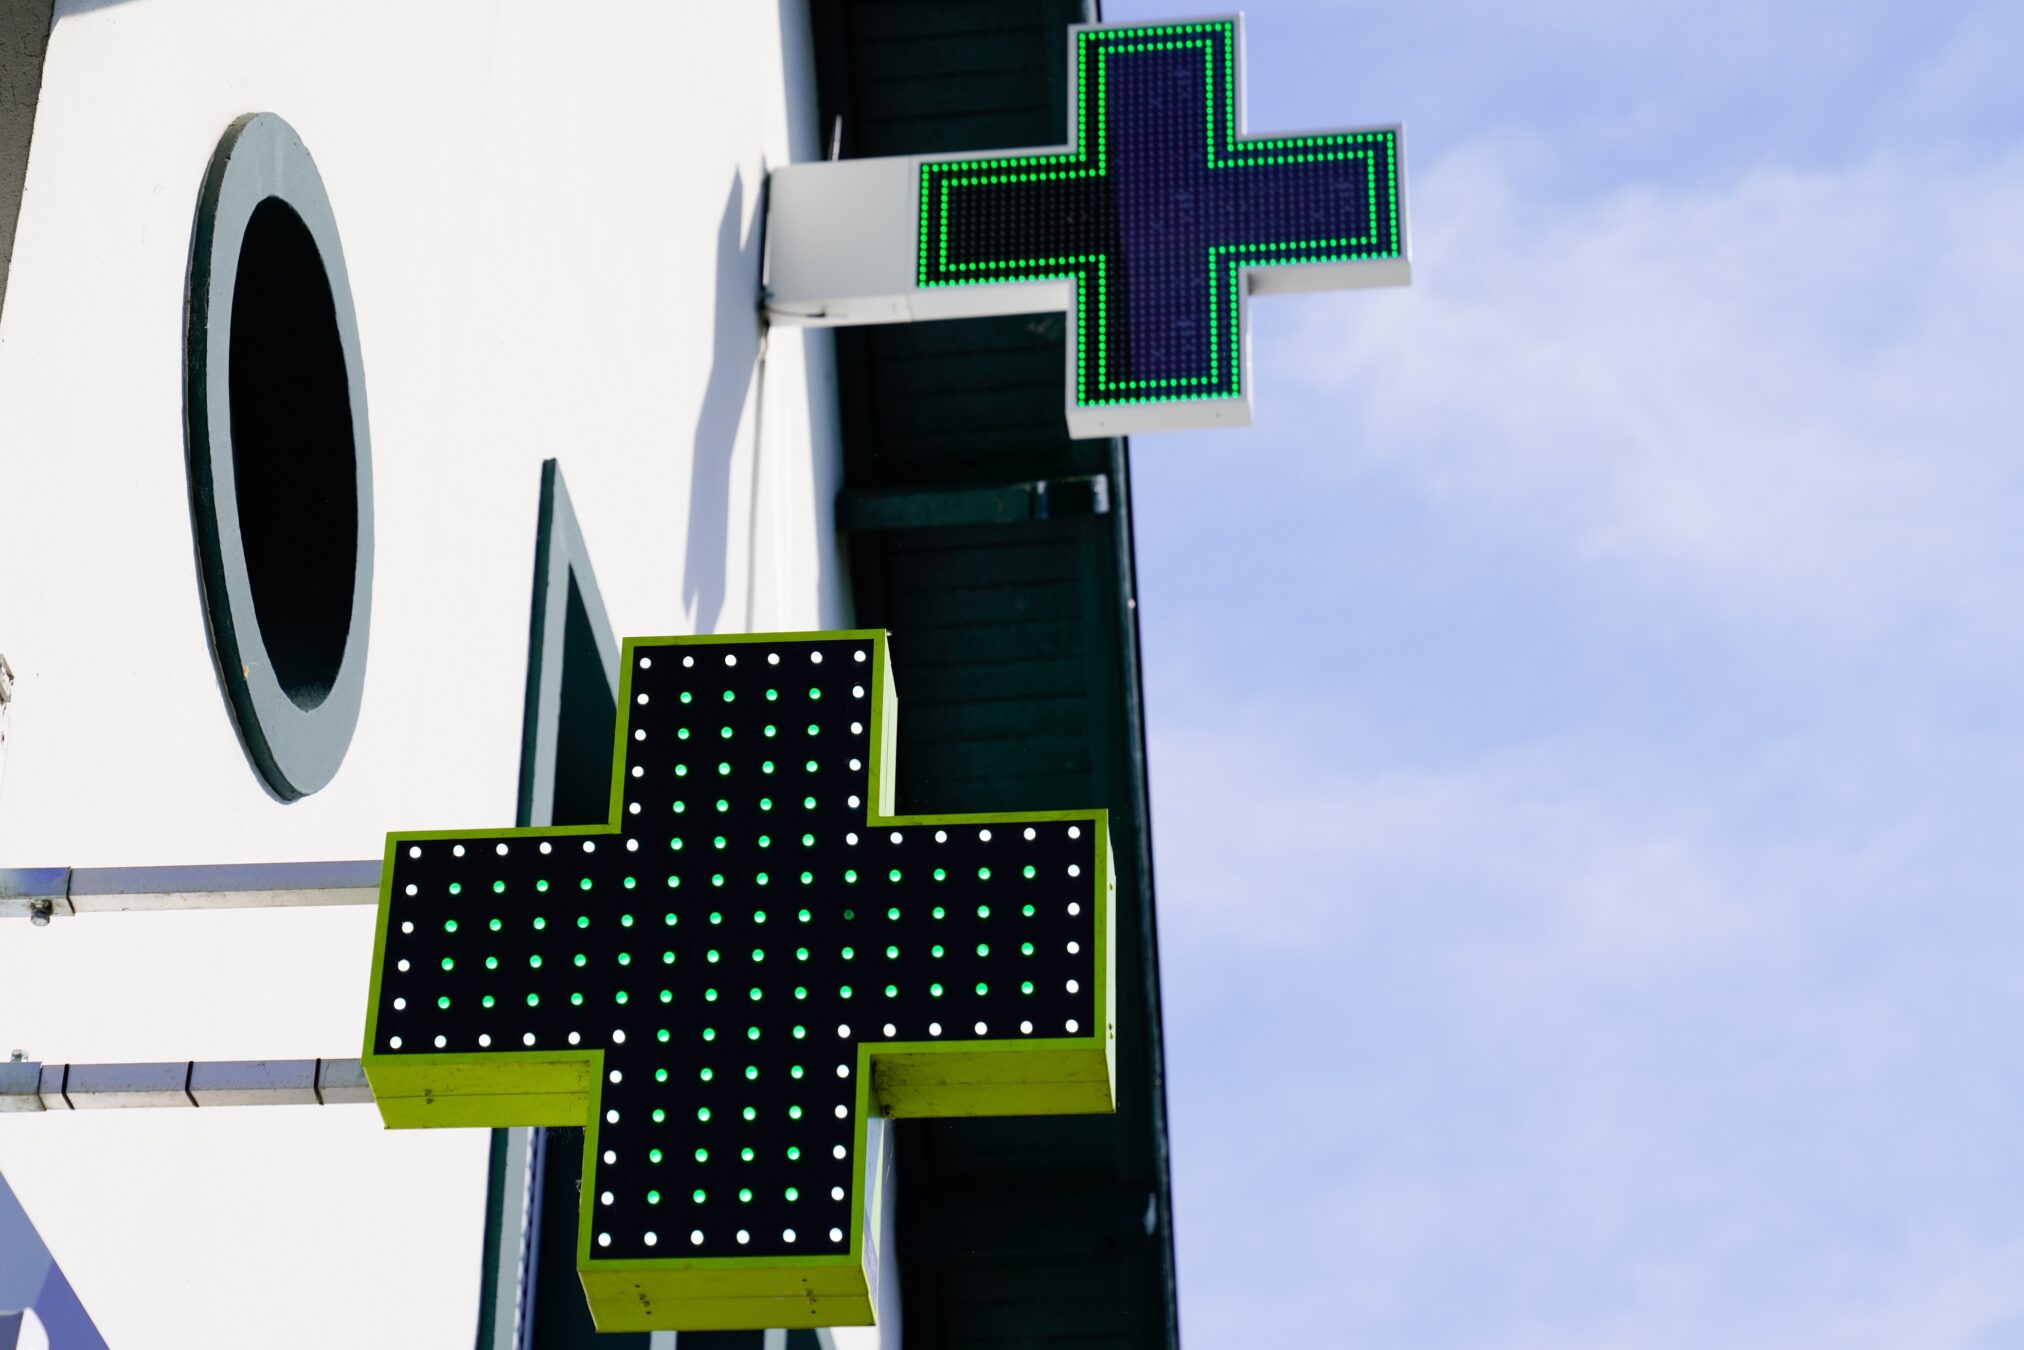 Opening hours key to pharmacy approval case | AJP